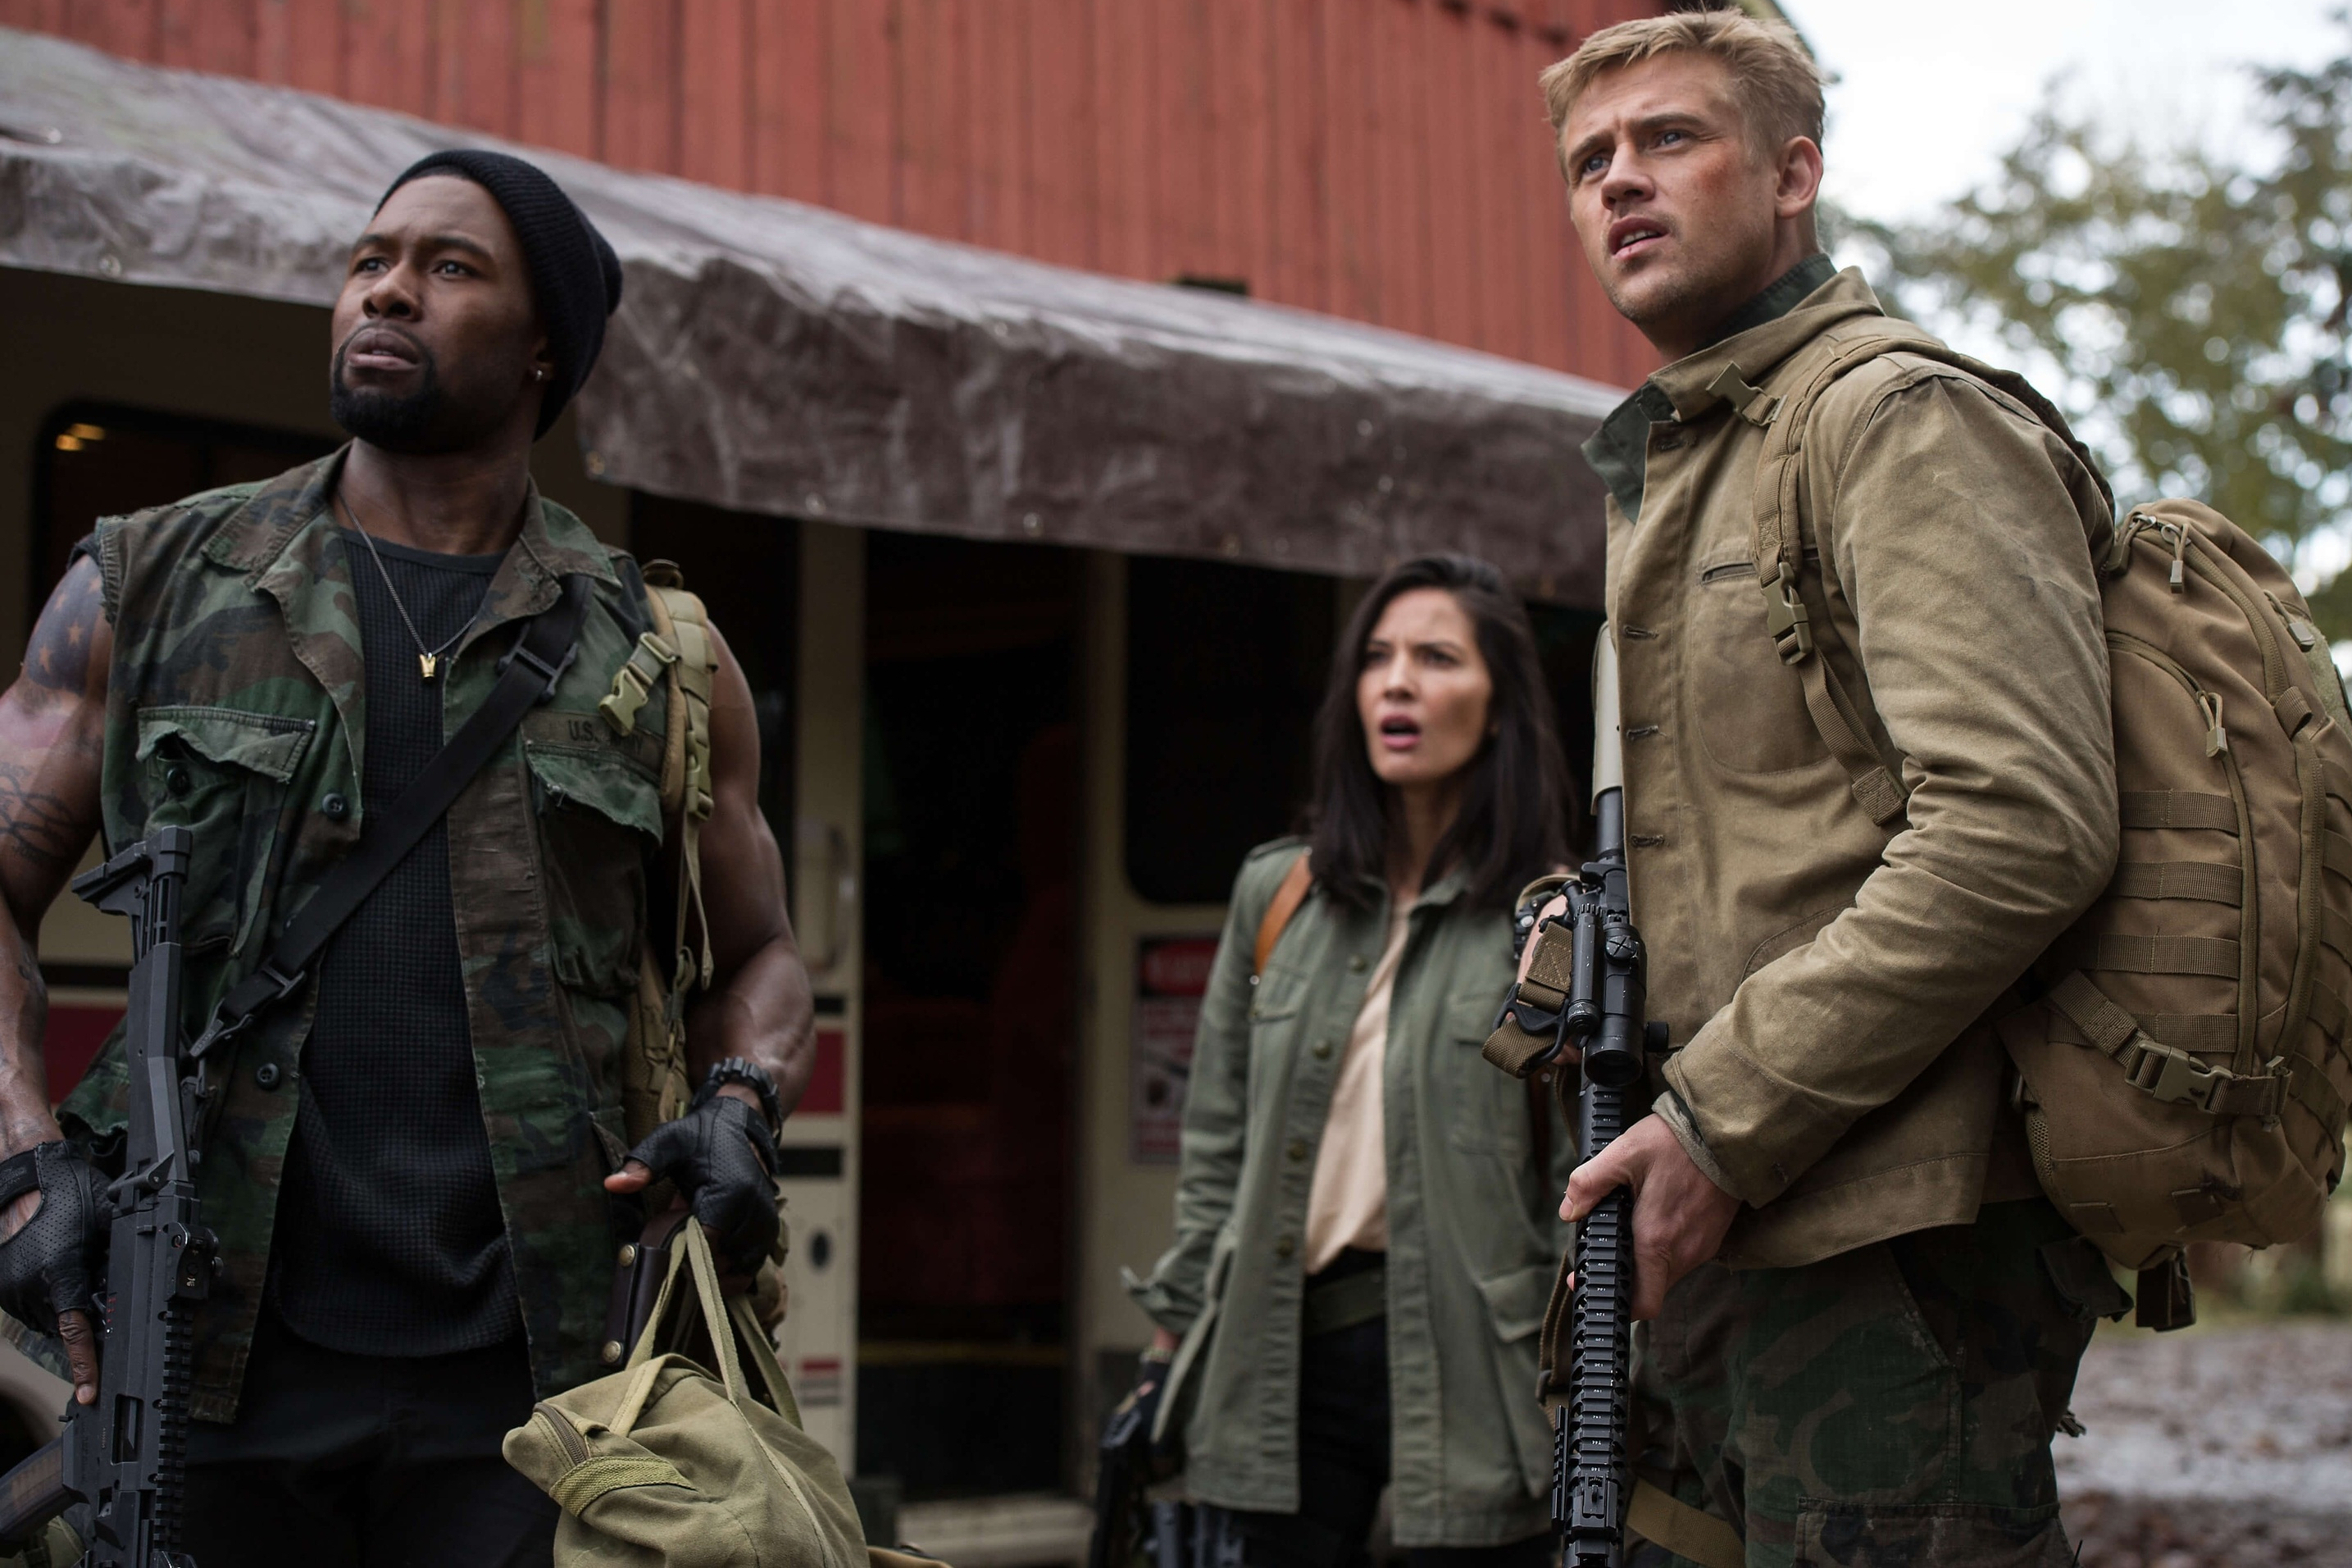 Trevante Rhodes, Olivia Munn, and Boyd Holbrook stand together in The Predator.